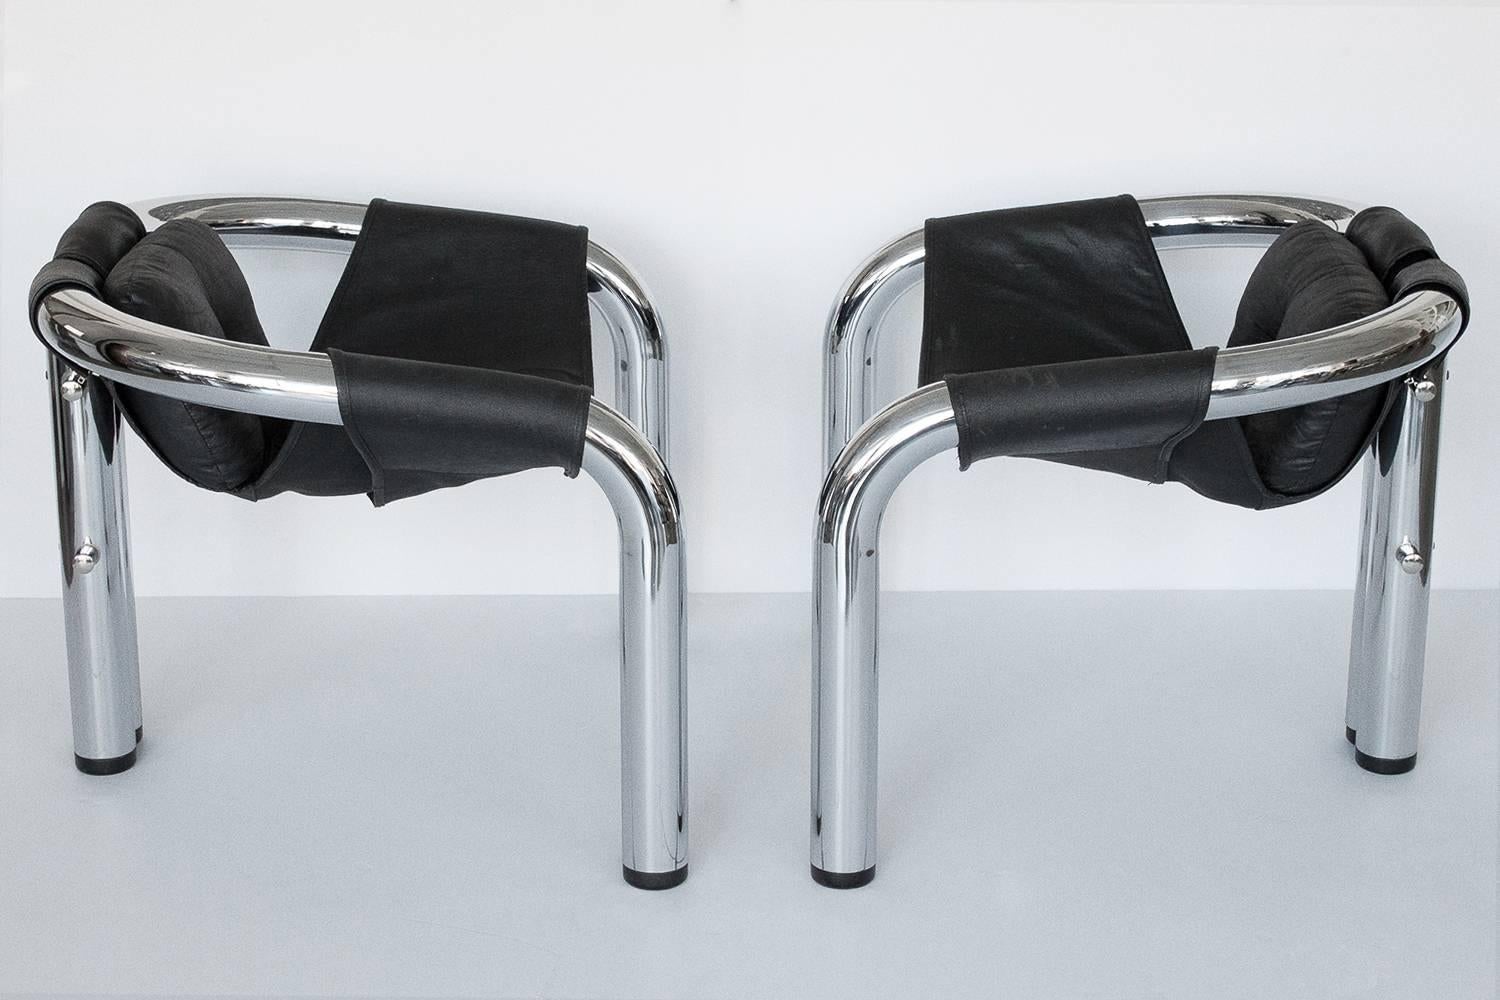 Pair of Palo Alto lounge chairs designed by Byron Botker for Landes Manufacturing Company, 1974. Comprised of 3 inch diameter chrome-plated steel tubular frame with sling seat and pillow. Black canvas sling upholstery with black vinyl facing.